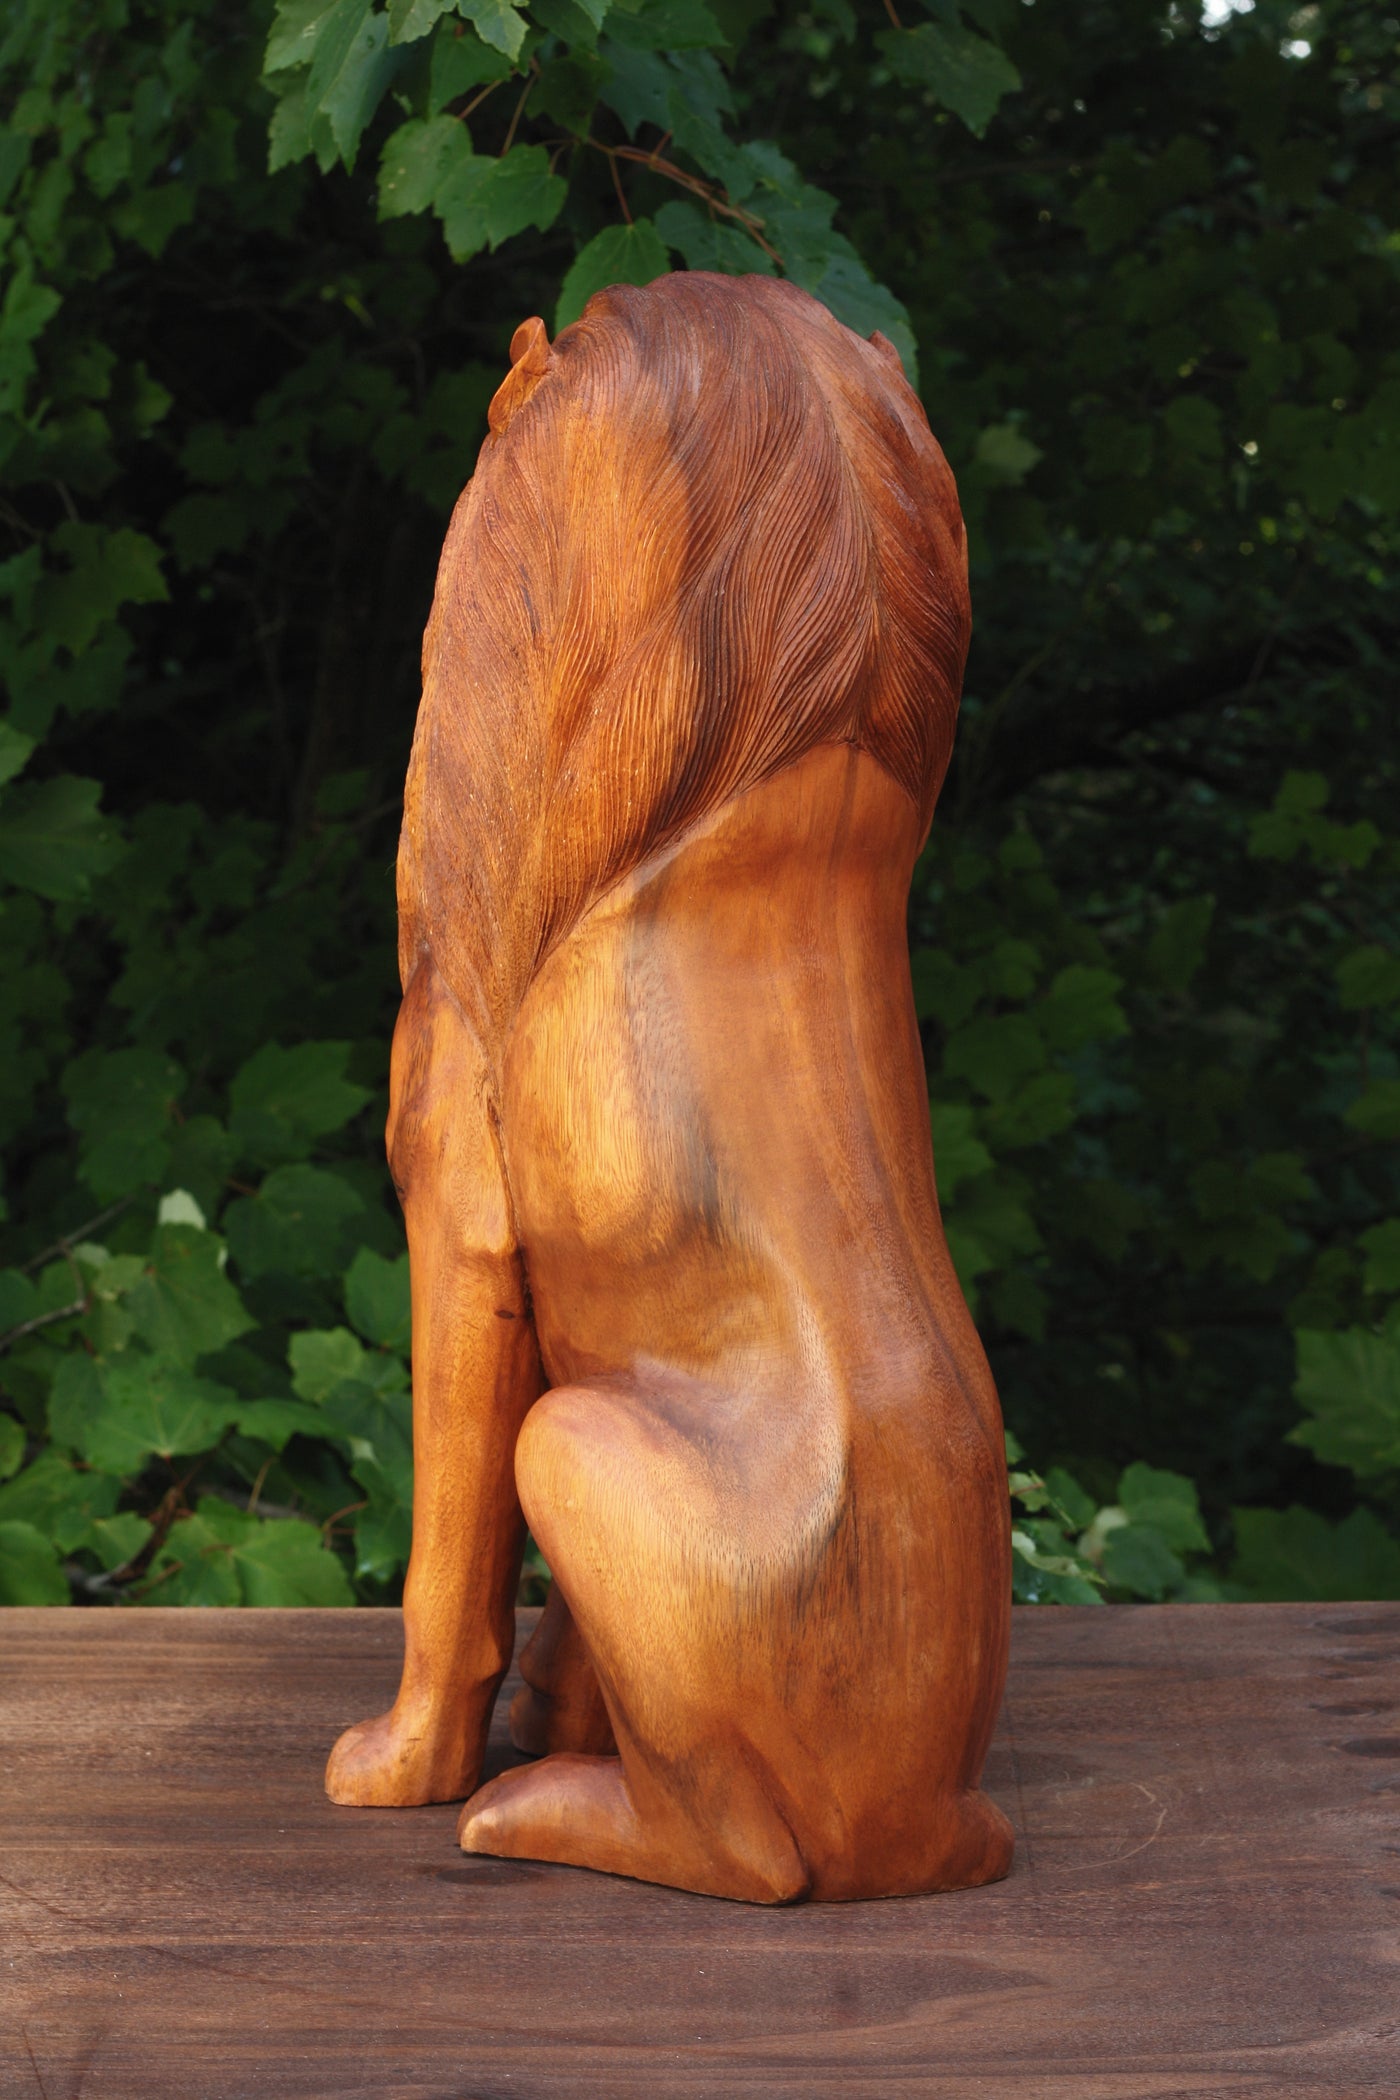 19" Large Solid Heavy Wooden Hand Carved Lion Sitting Statue Figurine Sculpture Art Decorative Home Decor Accent Rustic Lodge Handmade Handcrafted Decoration